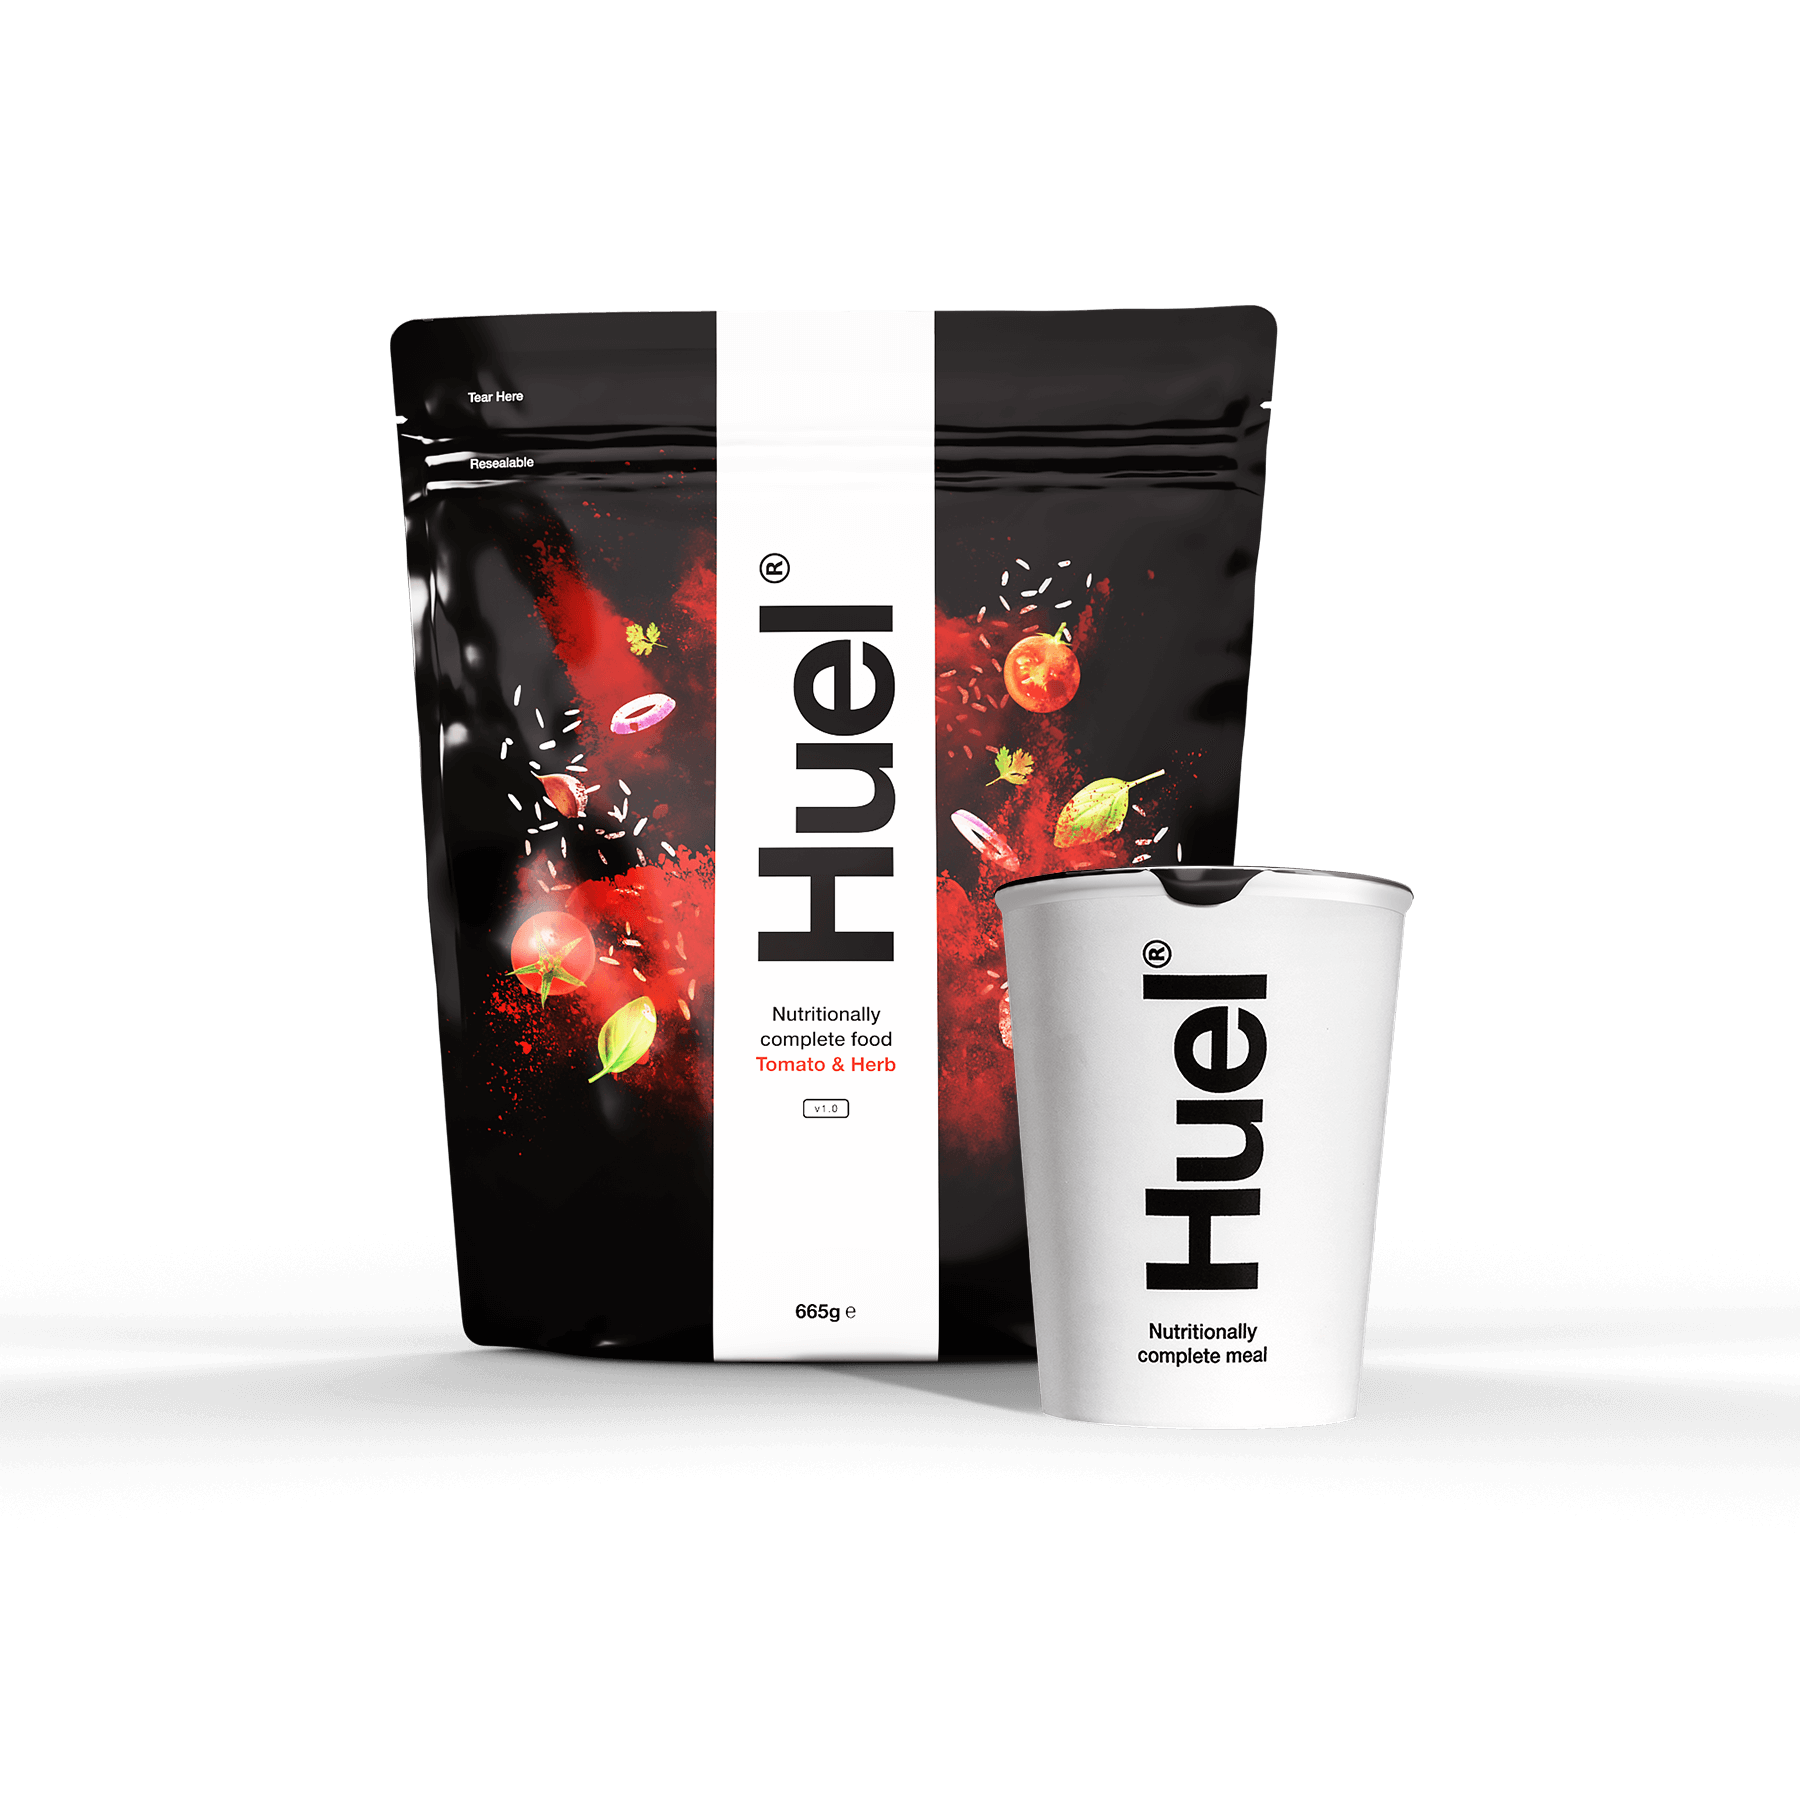 Huel Black Edition Chocolate Protein Powder Meal Replacement Shake, 34  Scoops - 100% Complete Nutrition, 40g Protein, 8g Fiber, 27 Vitamins. 